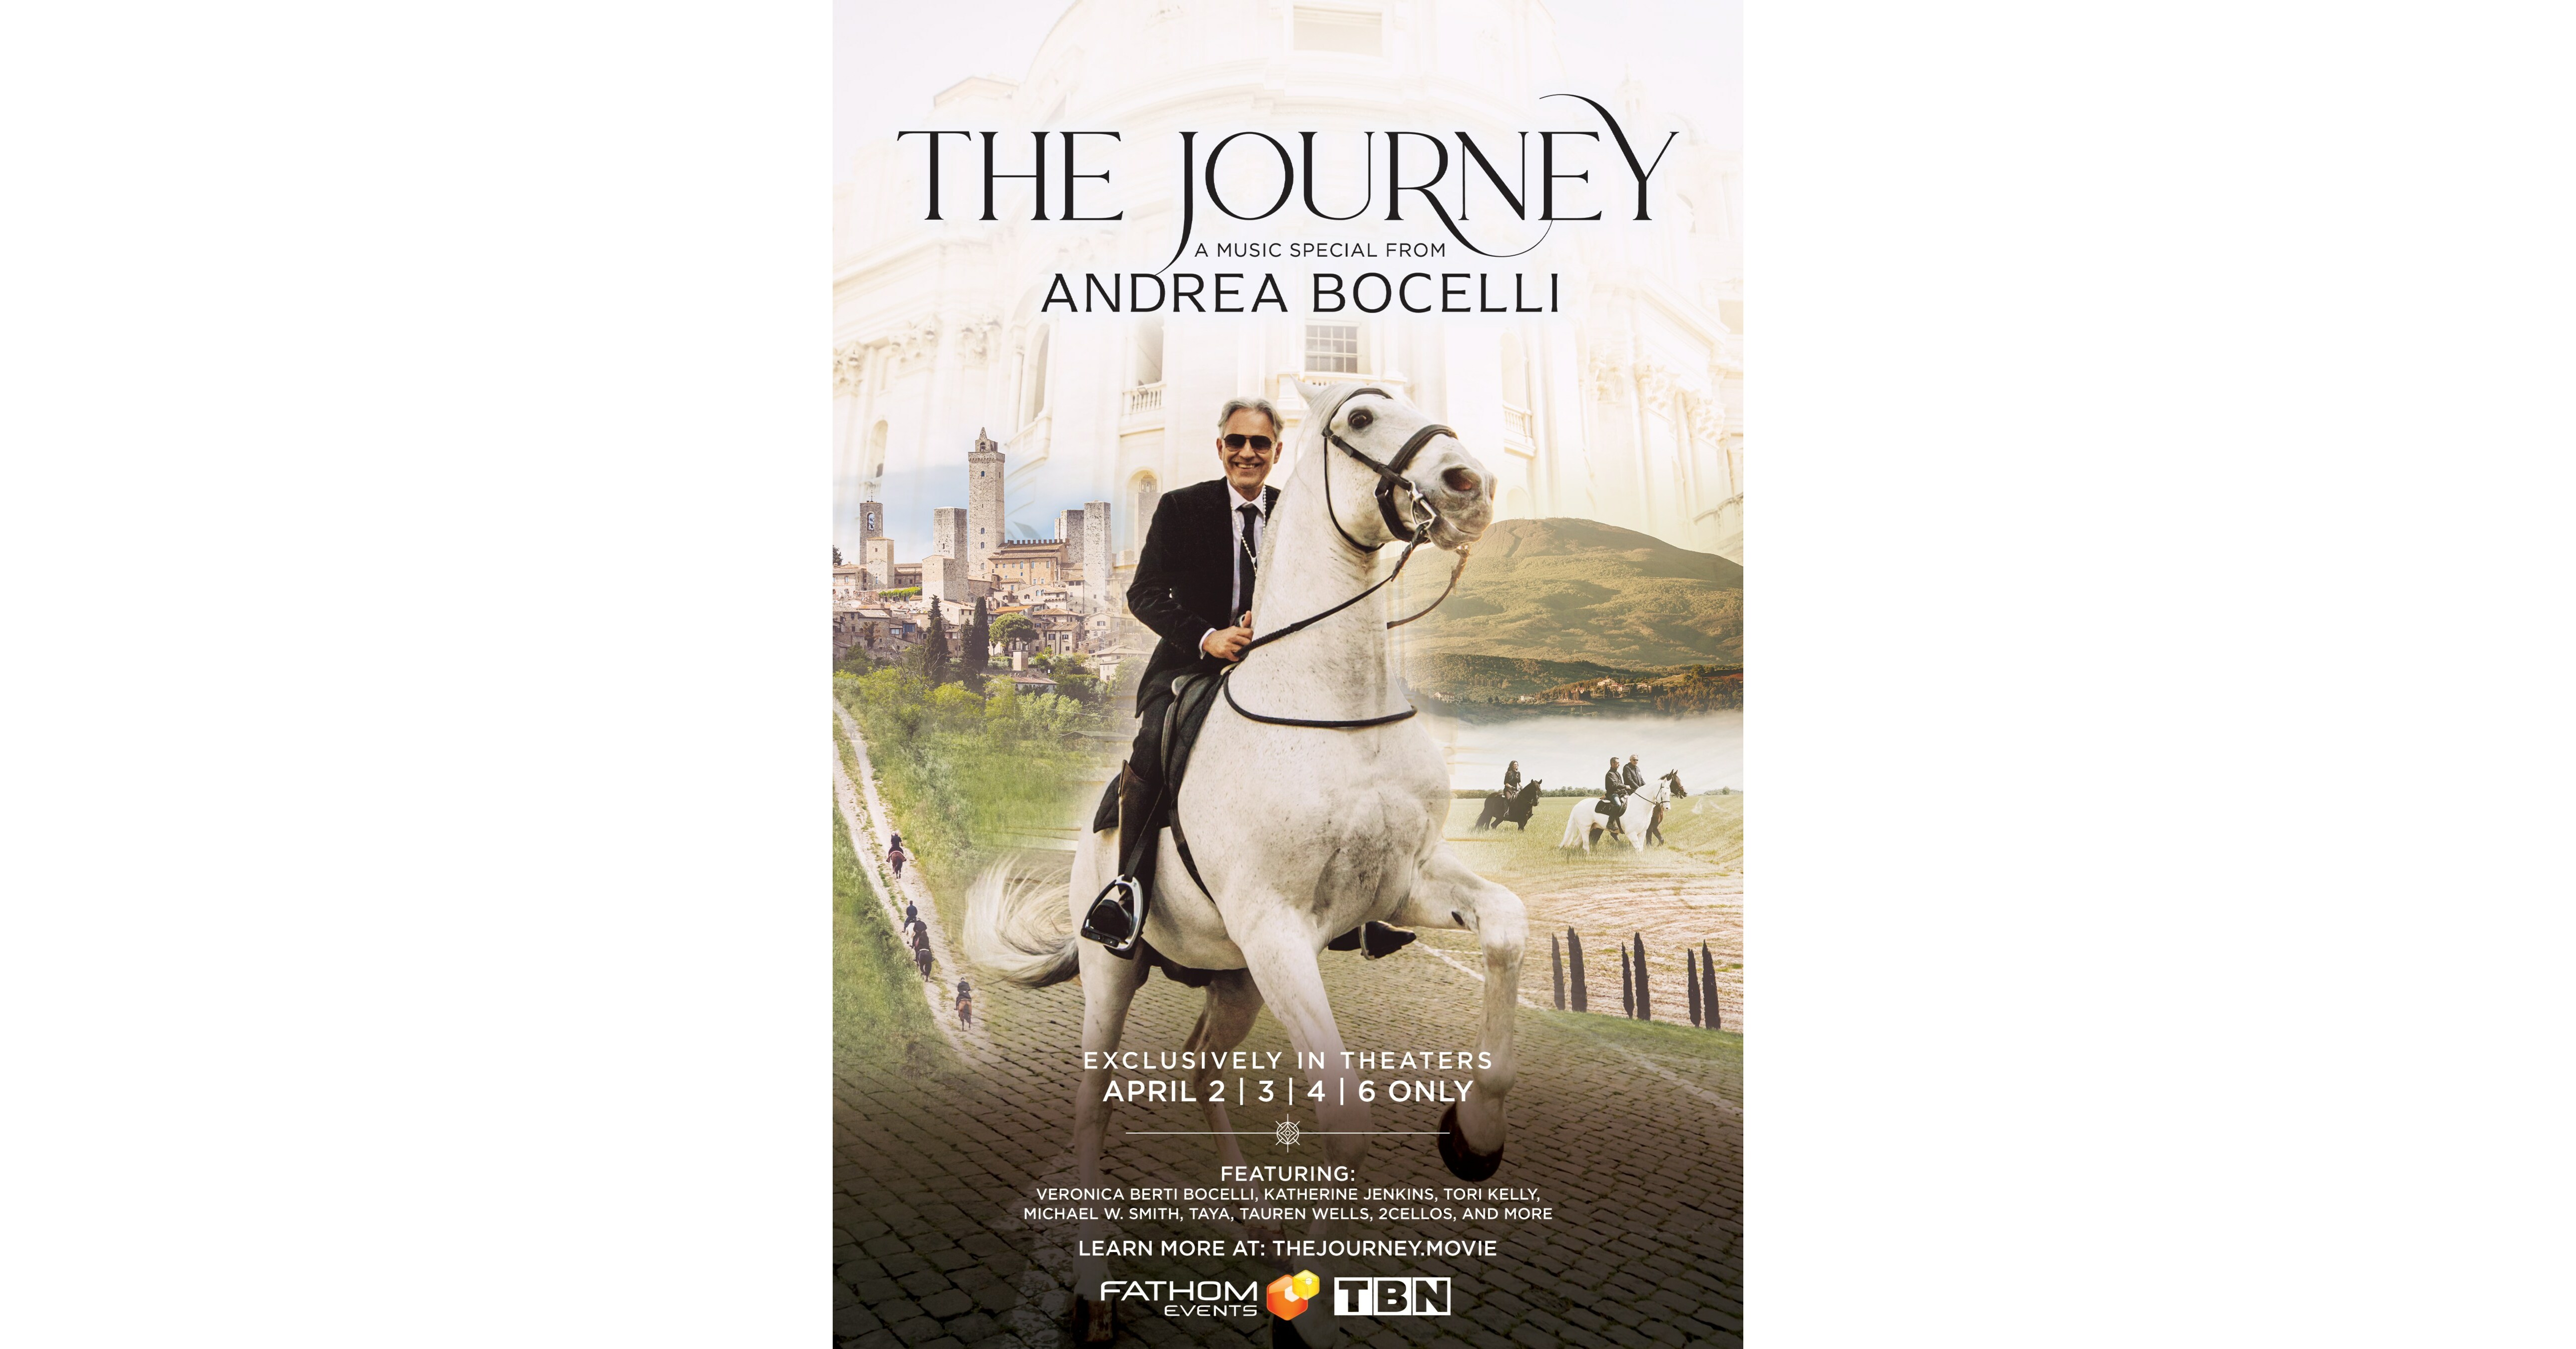 TBN Presents THE JOURNEY A Music Special From Andrea Bocelli Coming to